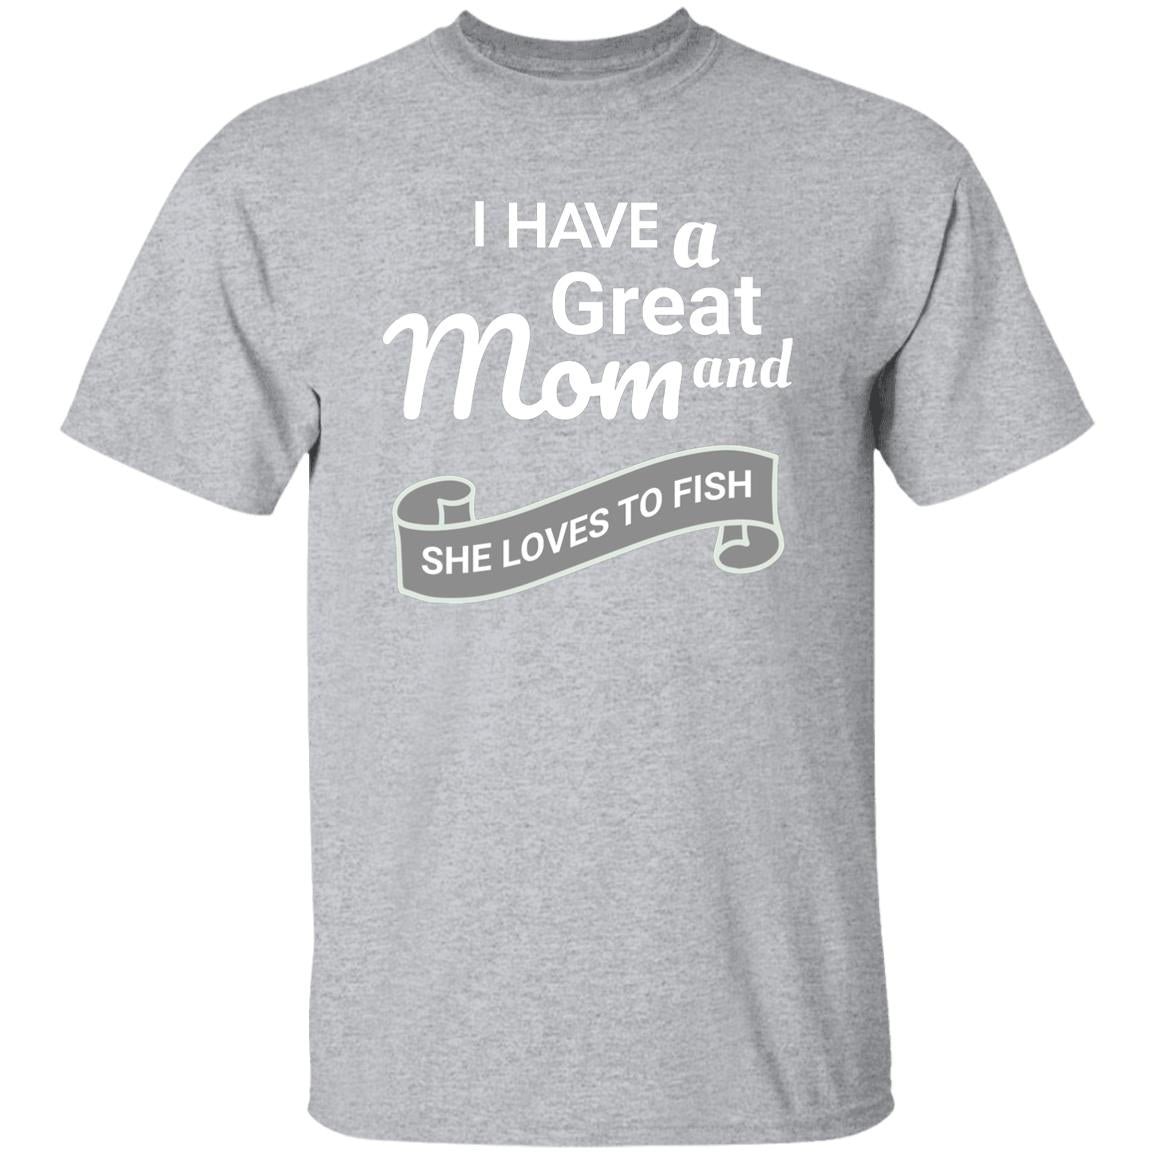 I have a great mom and she loves to fish t-shirt k sport-grey